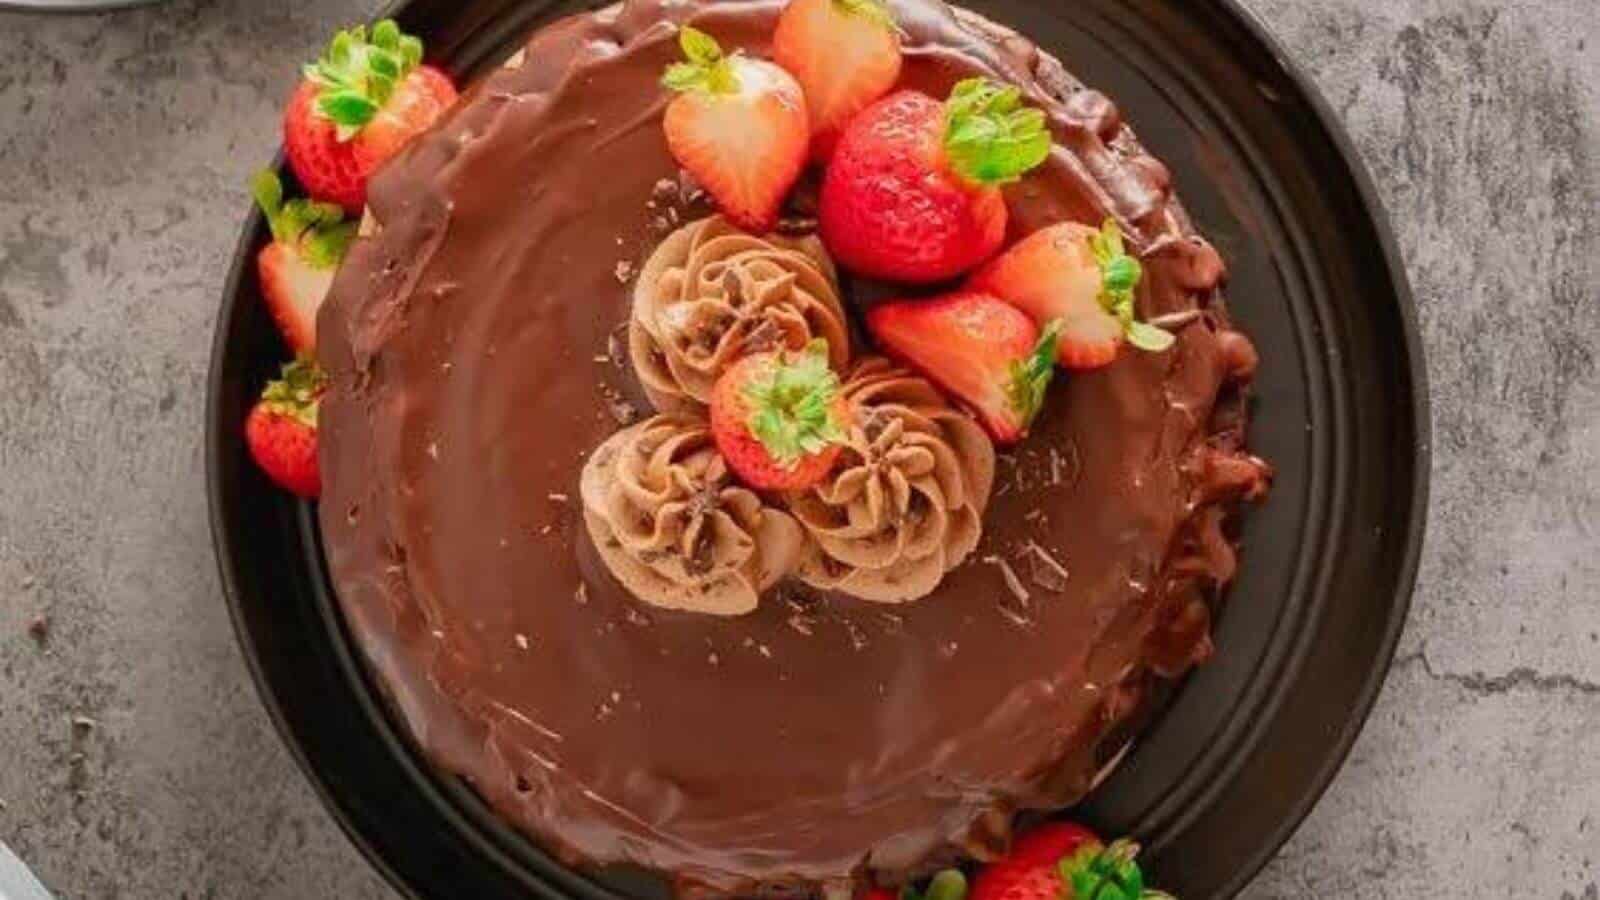 Triple layer flourless chocolate cake with strawberries on top.